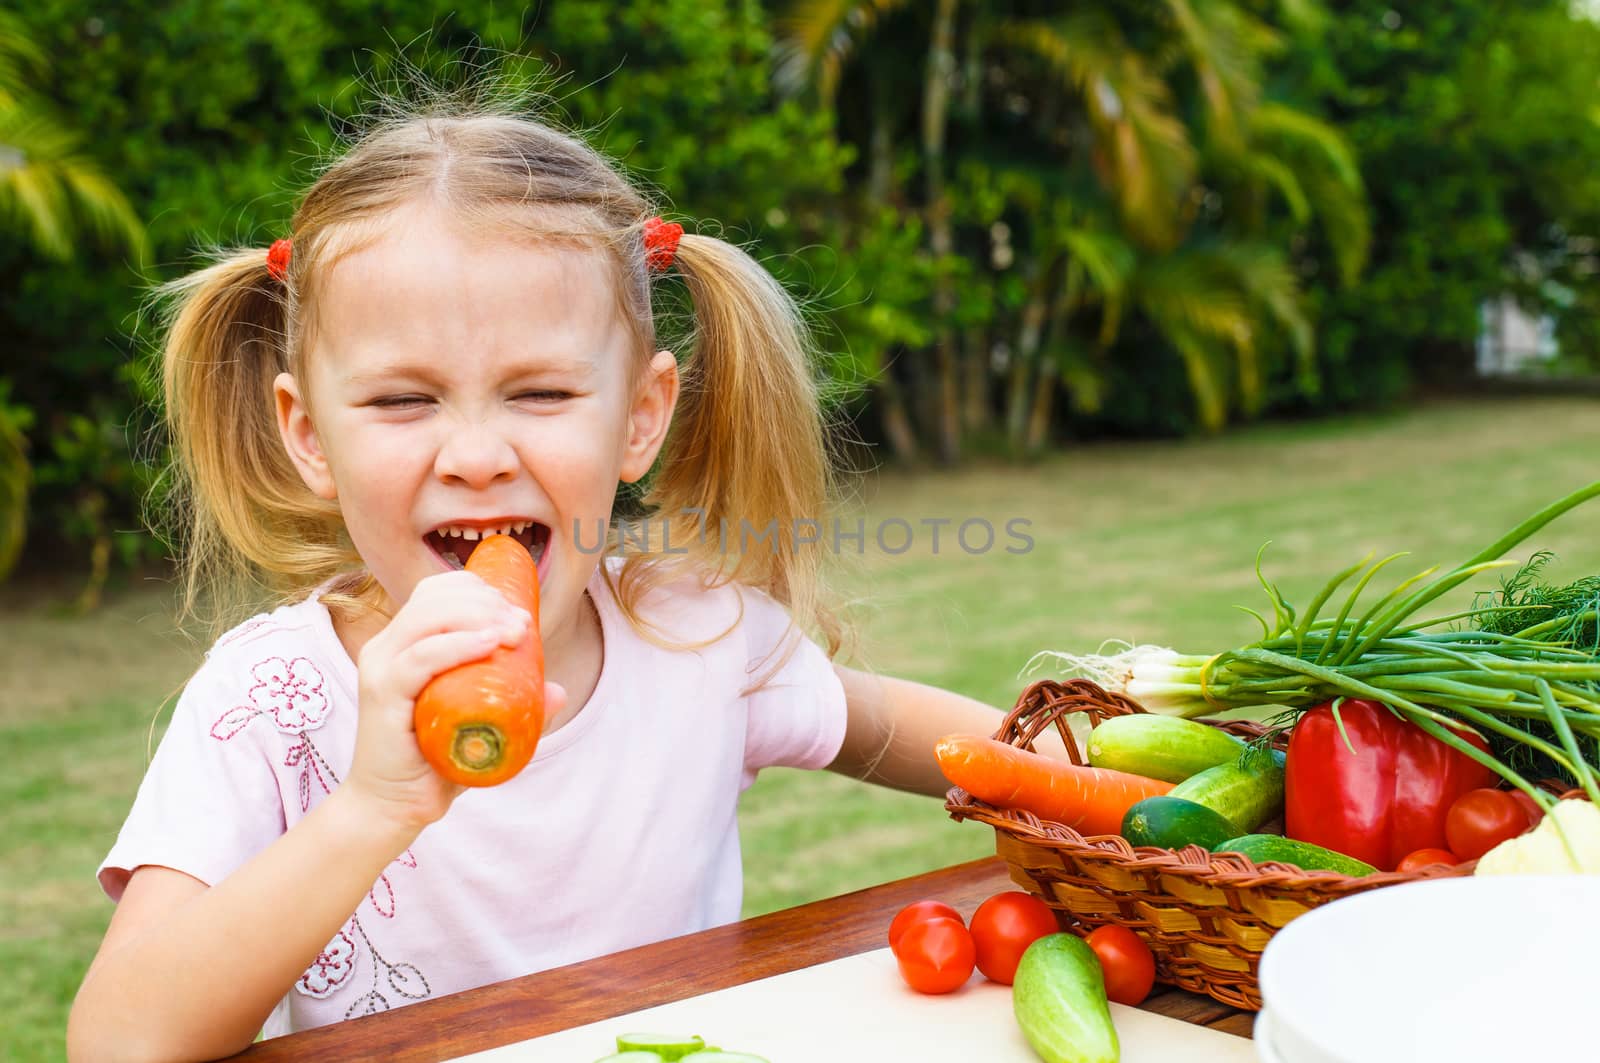 Happy little girl holding a carrots. Concept of healthy food.